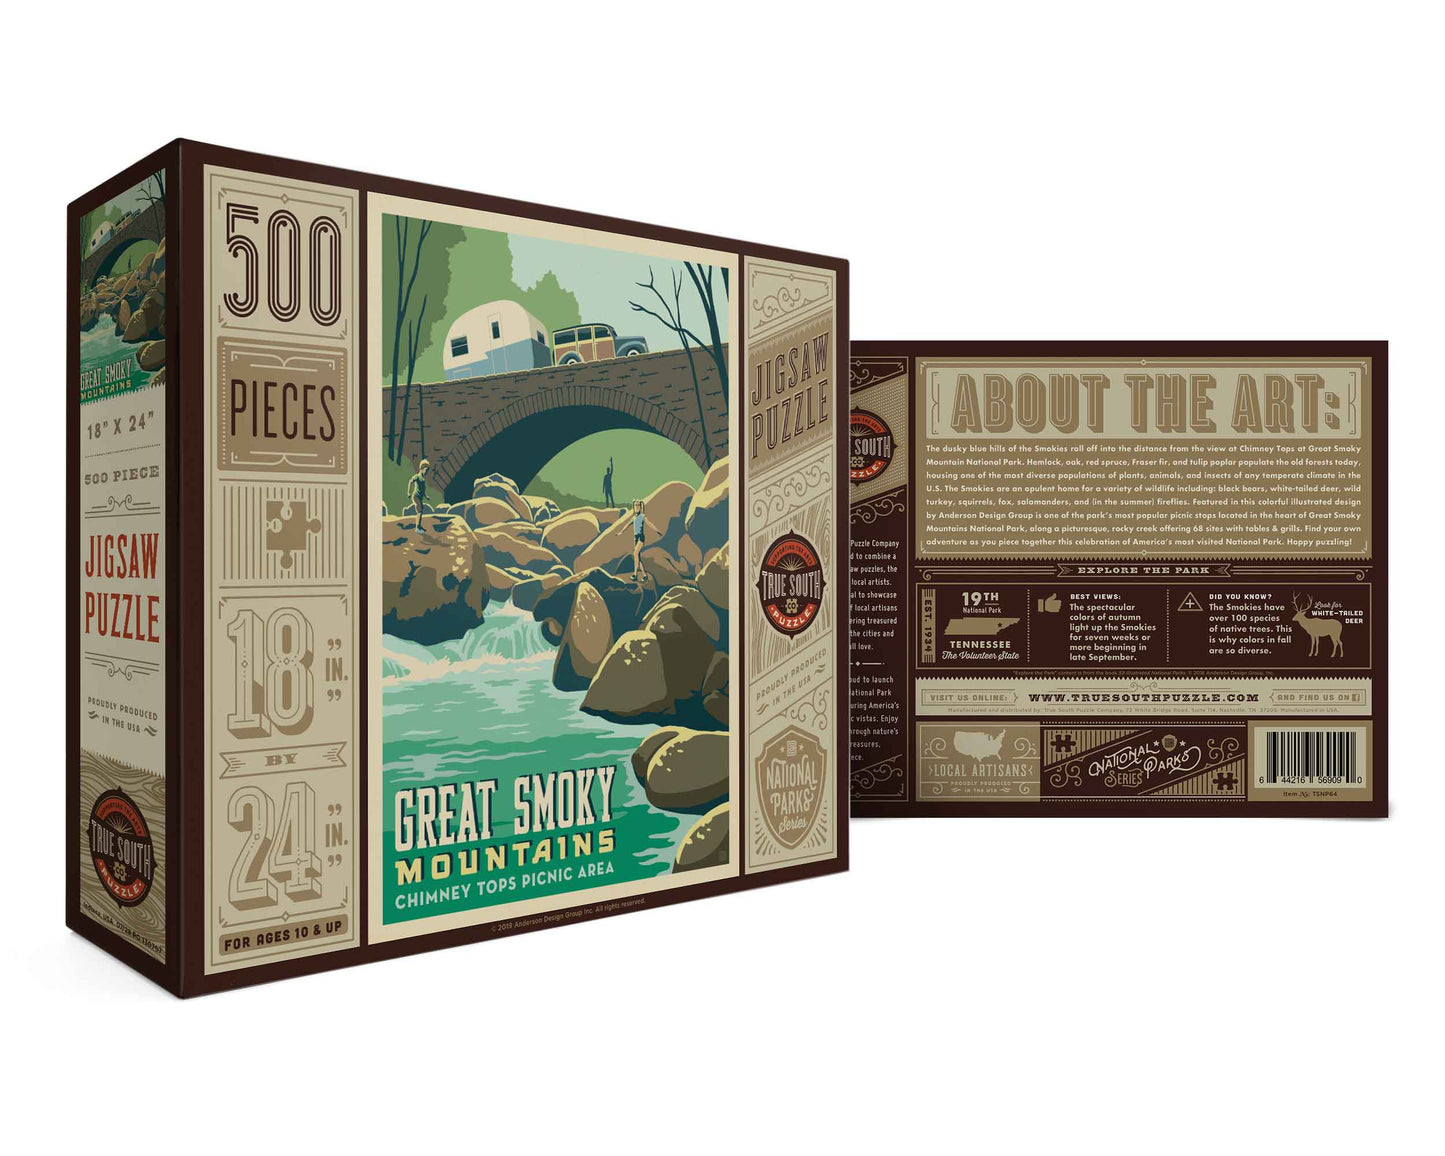 Great Smoky Mountains Chimney Tops Puzzle